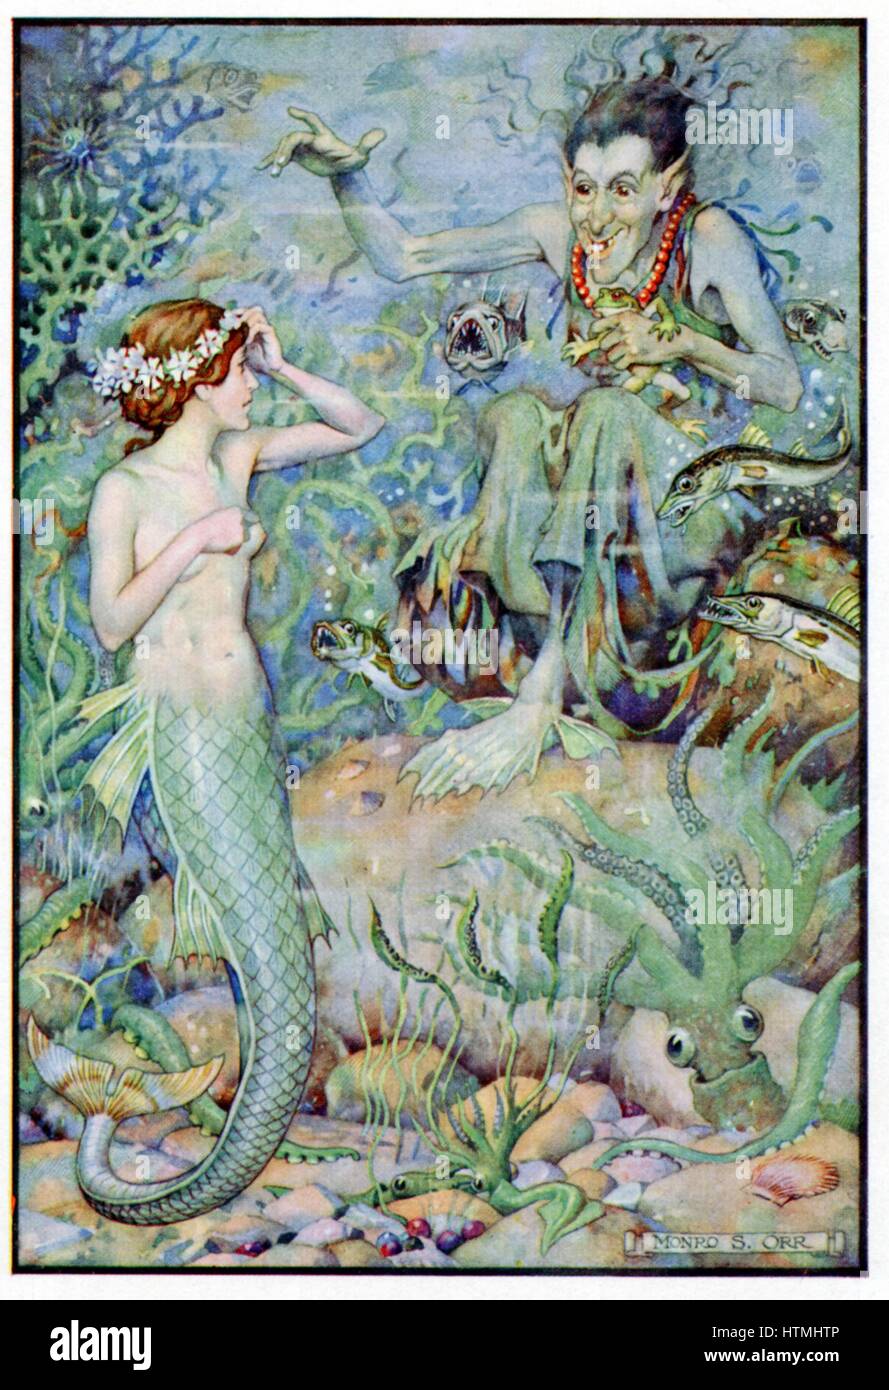 The Little Mermaid visiting the undersea witch for spell to help win love of prince she rescued from shipwreck. Hans Christian Andersen fairy story illustrated by Monro S Orr (b1874) Stock Photo